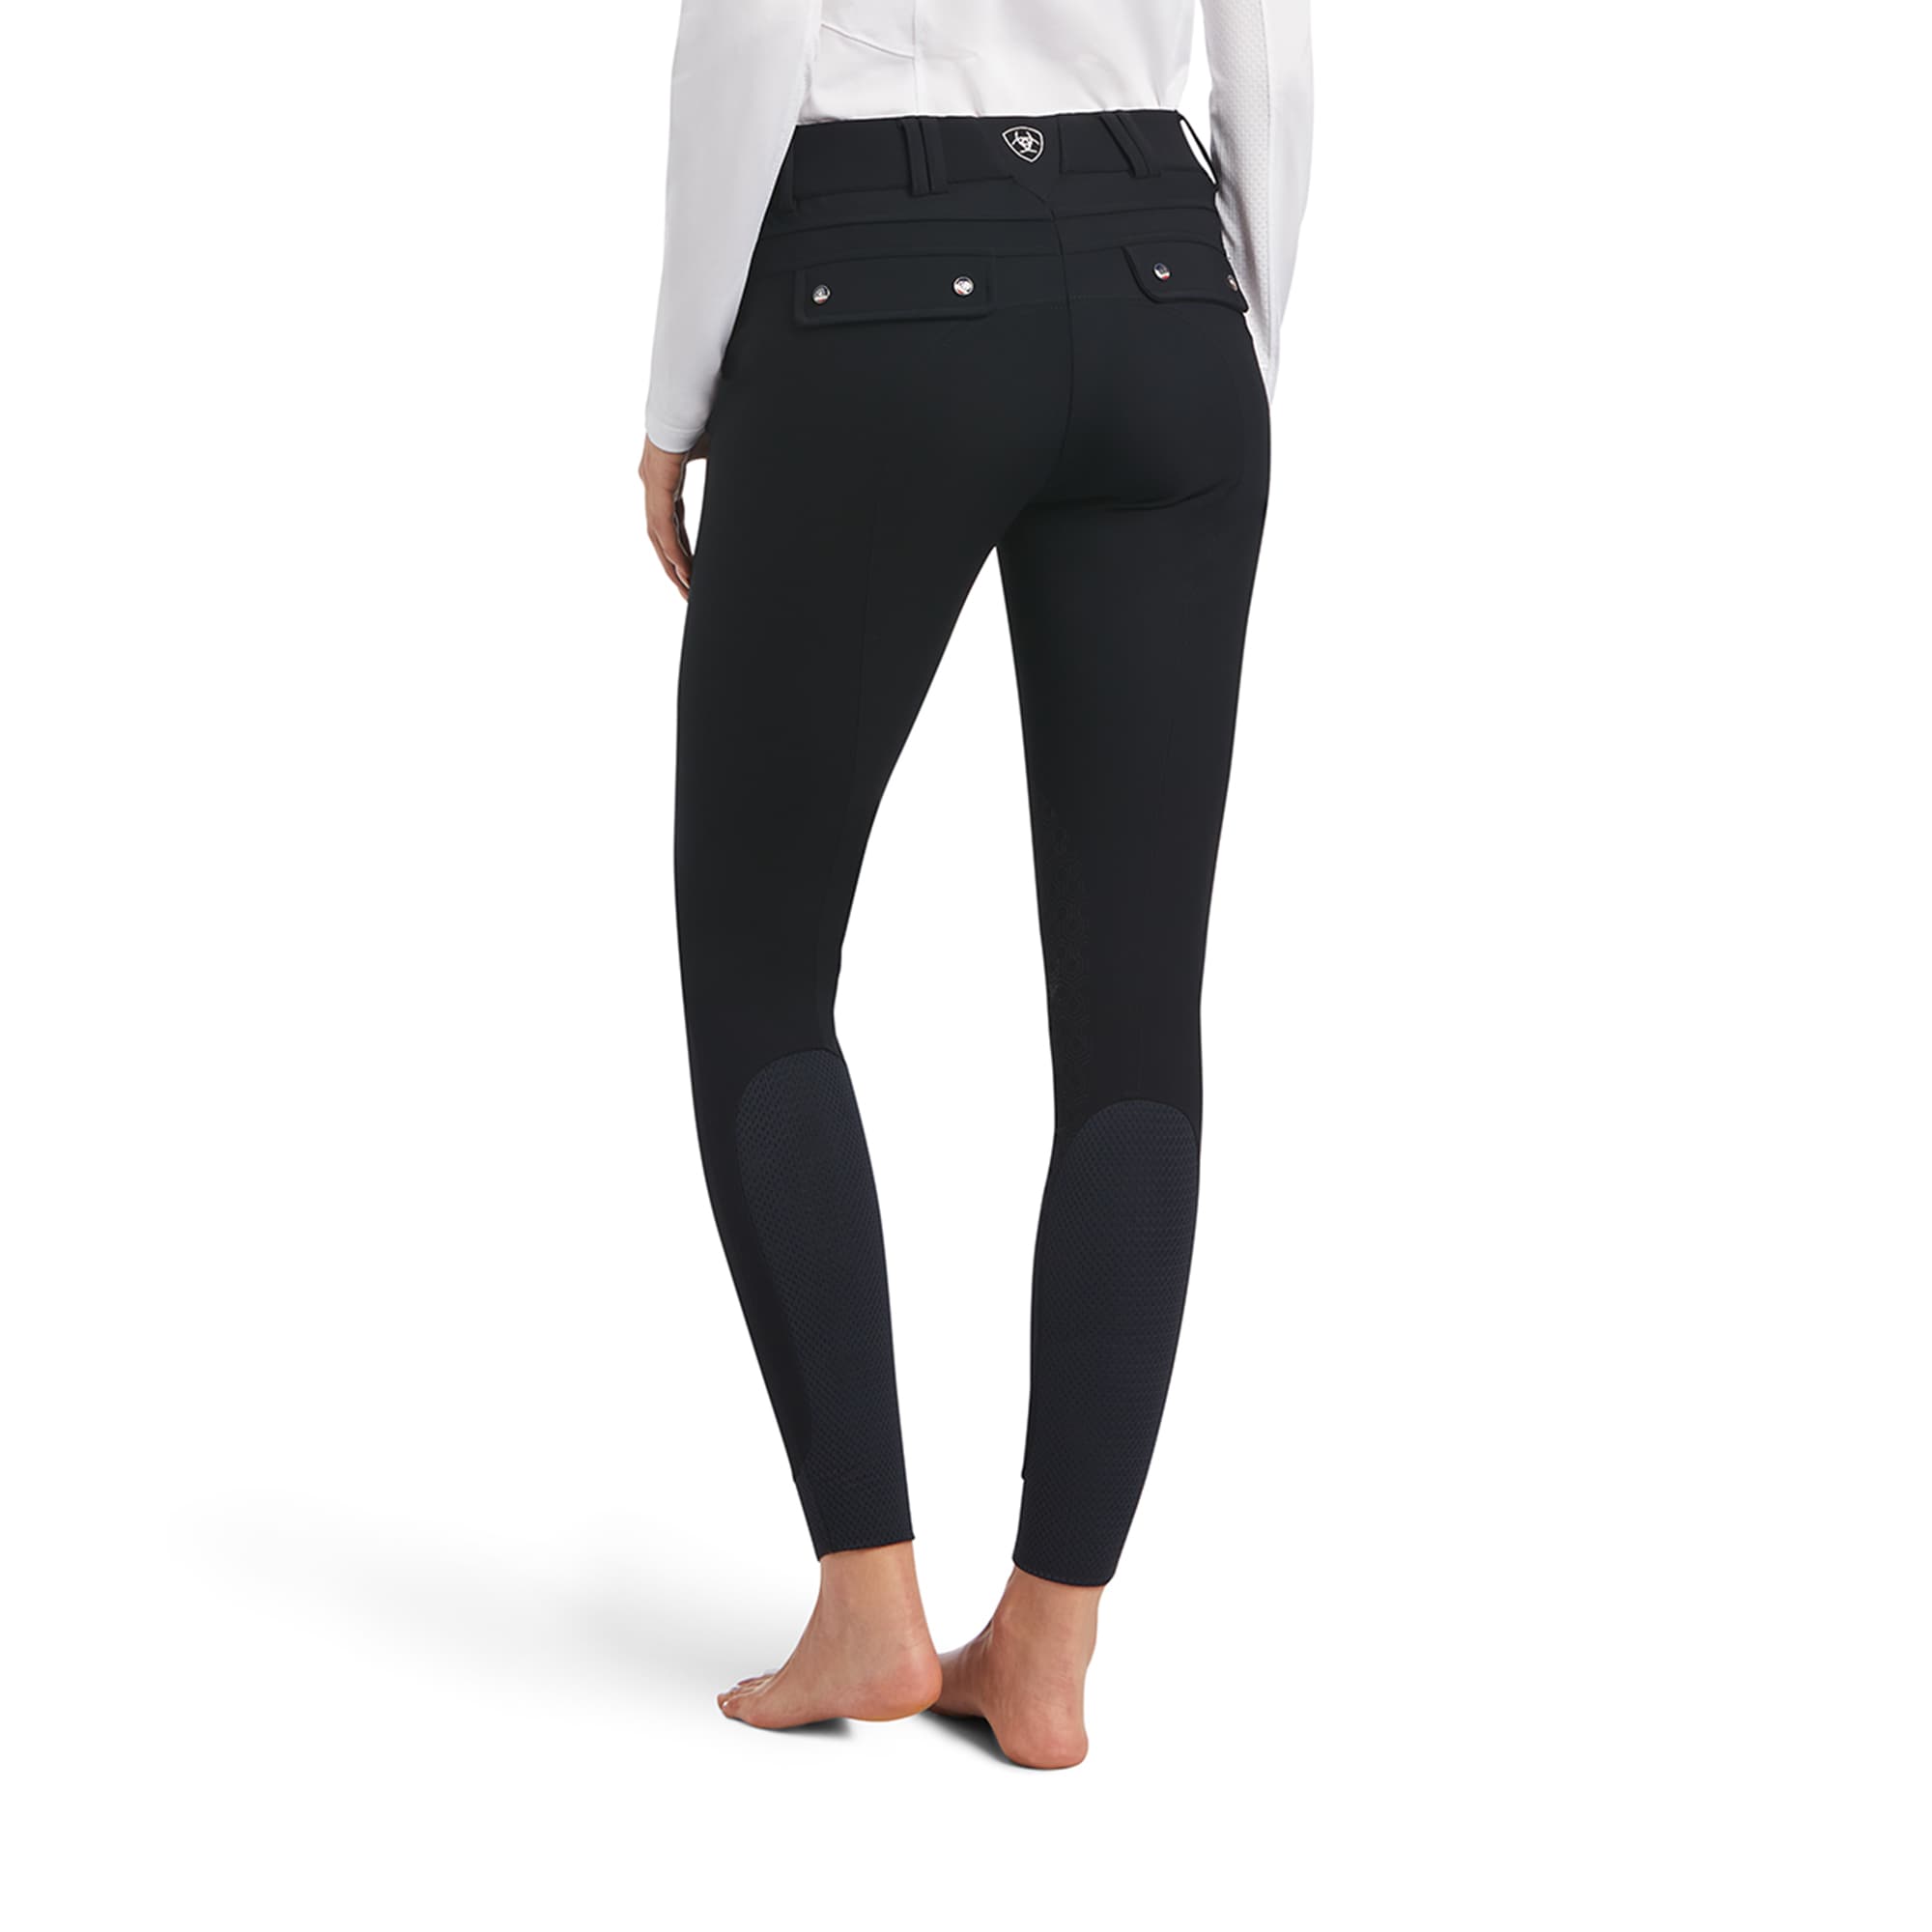 Ariat Eos Motto KP Tights for Women